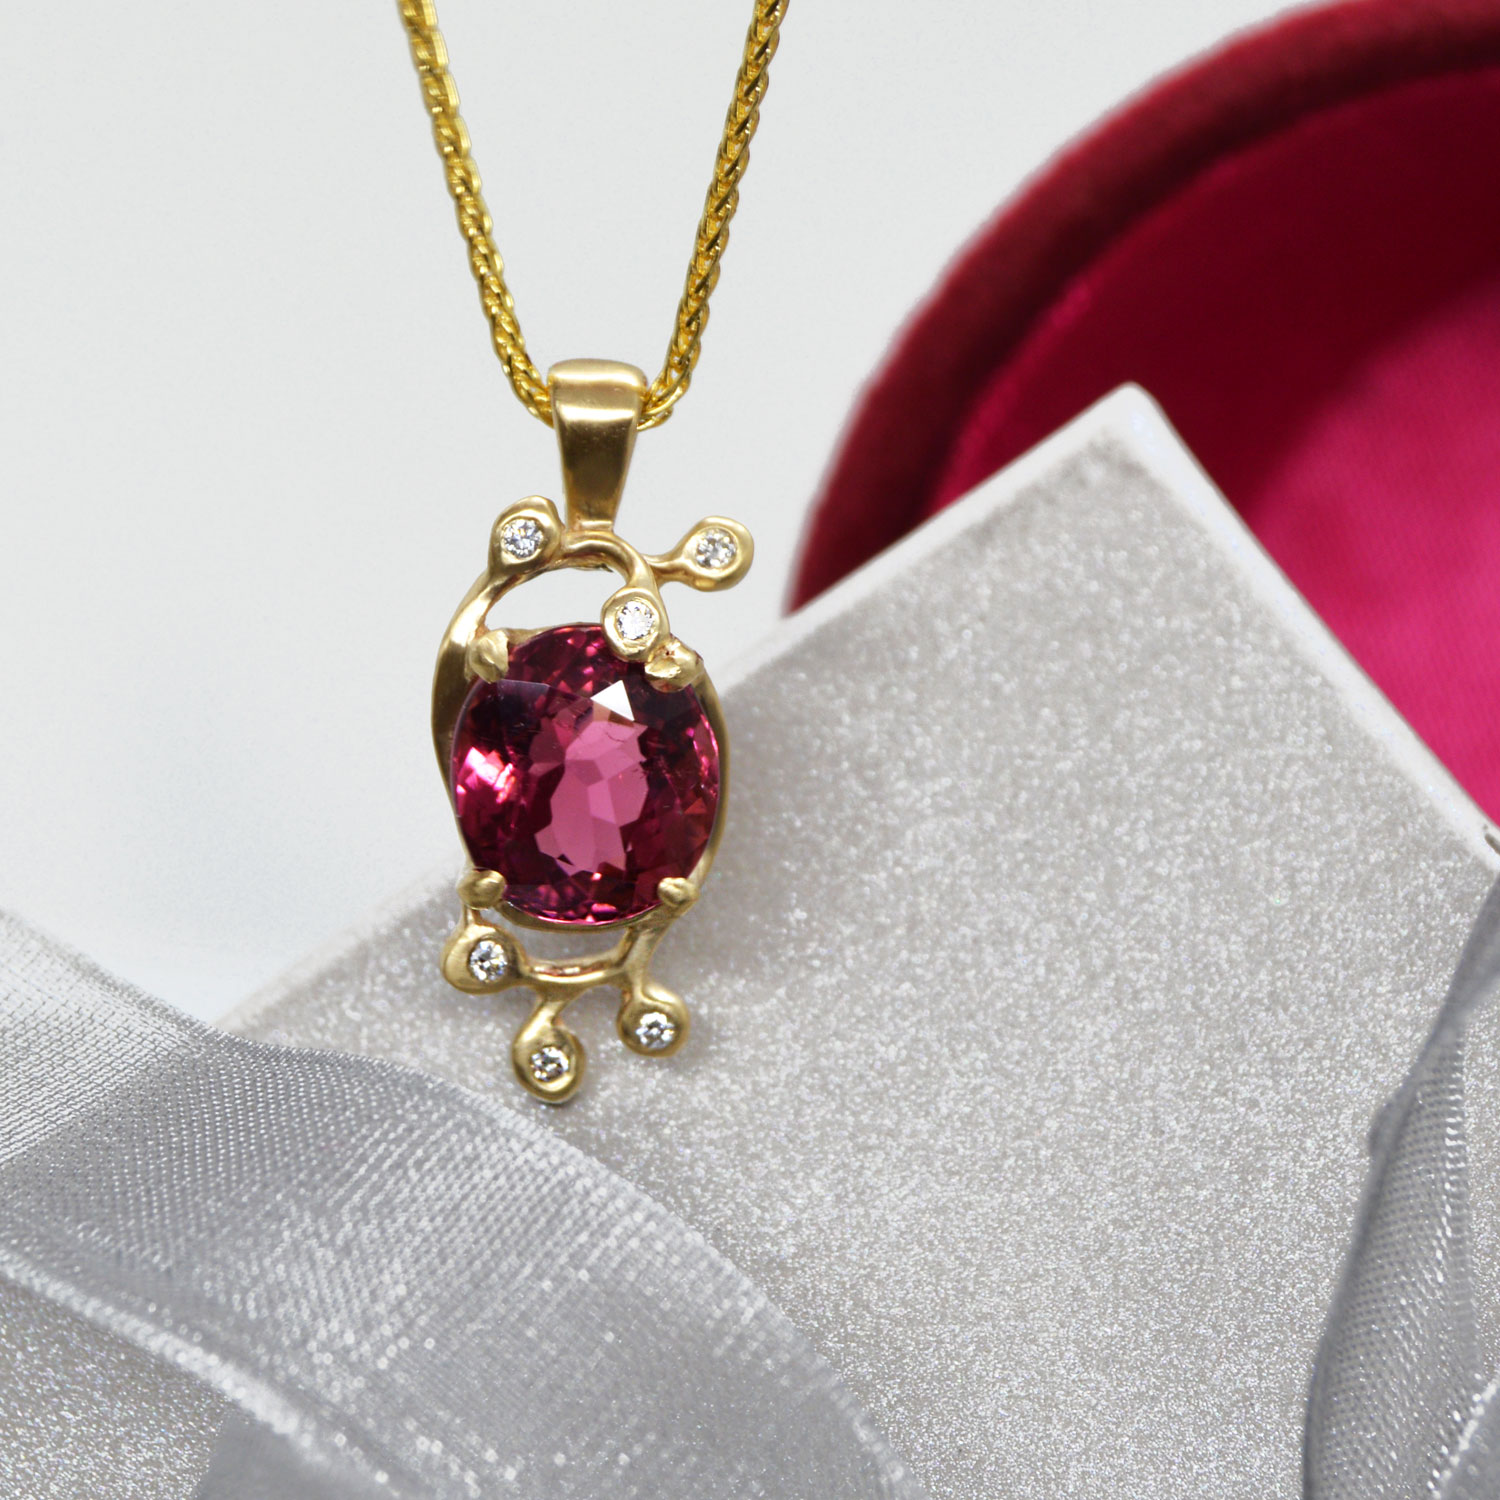 Red Tourmaline oval faceted gemstone in delicate leaf design with accent diamonds and a satin finish, designed by Morgan's Treasure